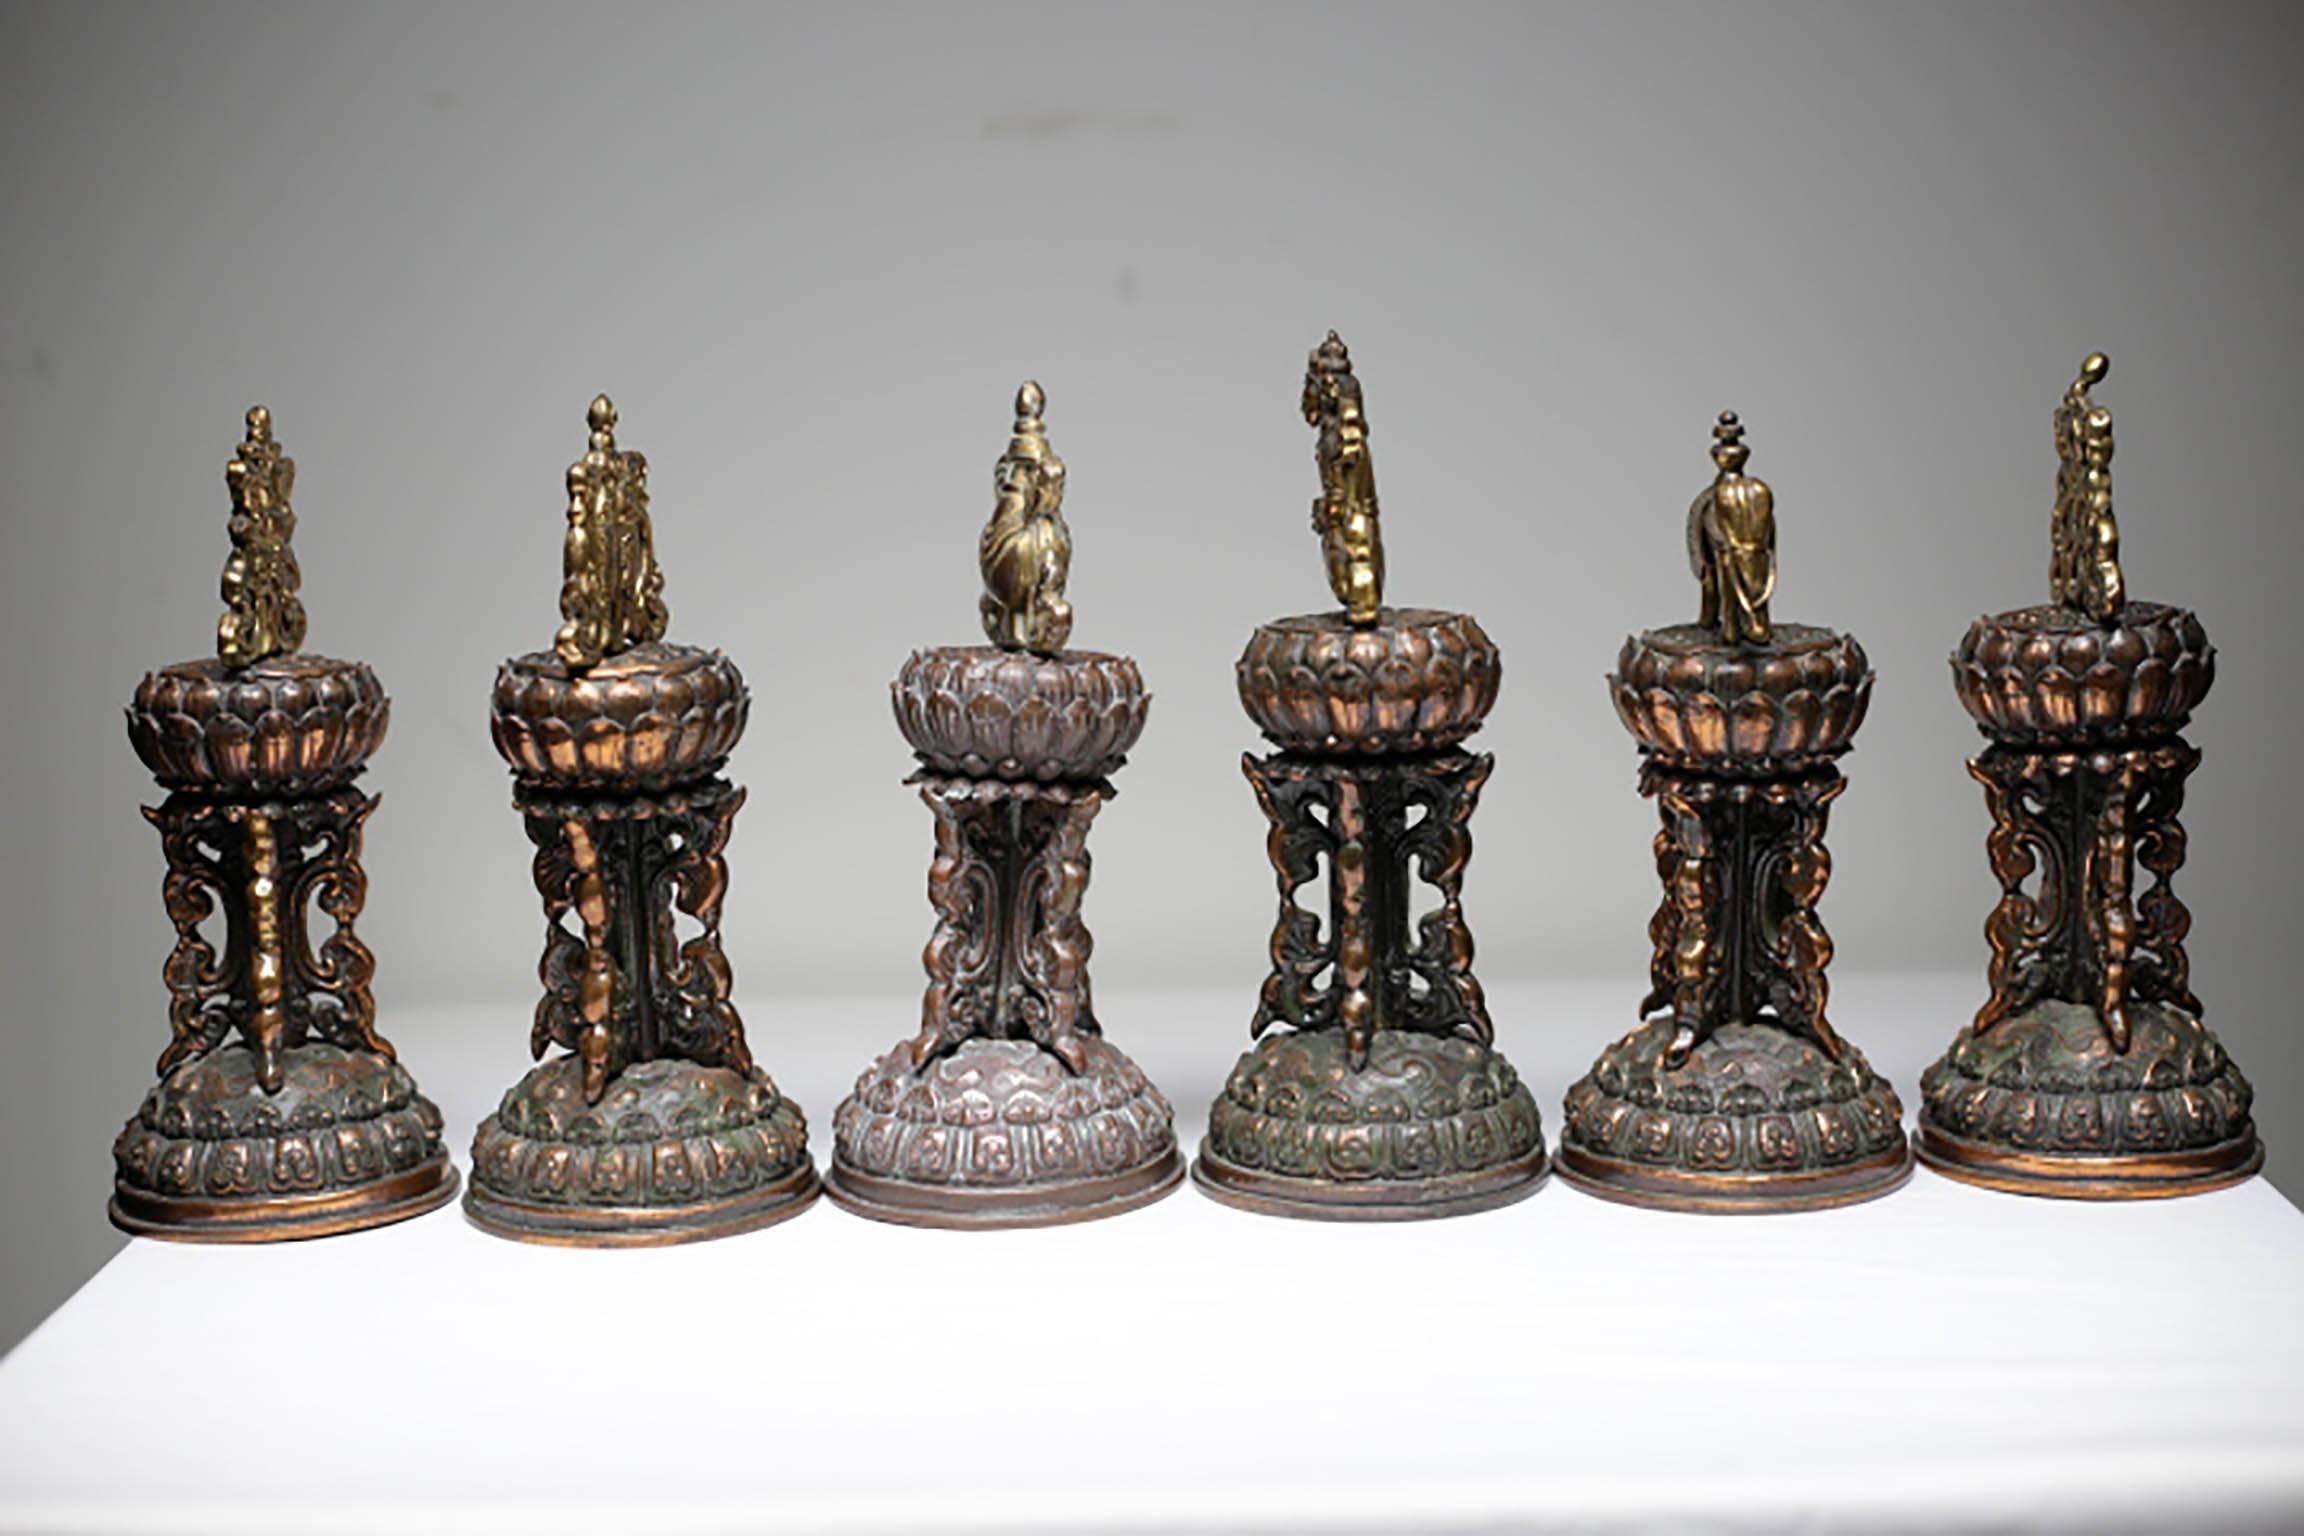 Collection of six bronze plated Balinese or Tibetan temple bells each depicting a different motive on top.
The bells are all missing from the inside.